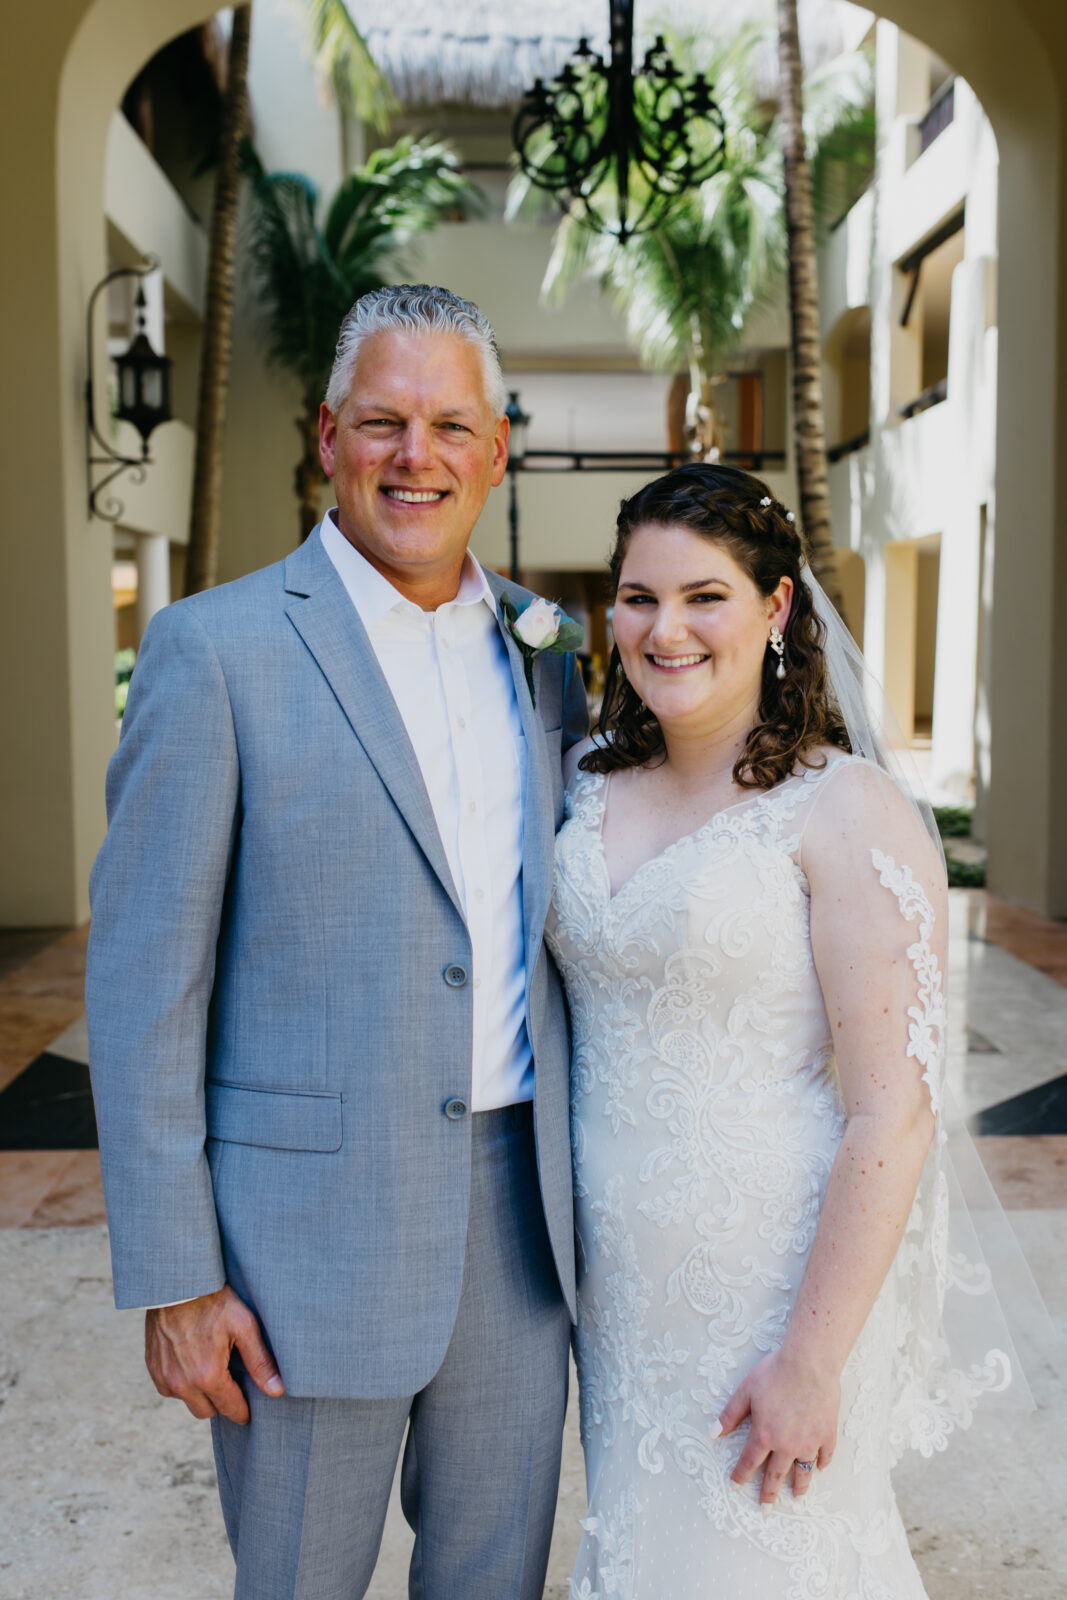 A photo of the bride and her father